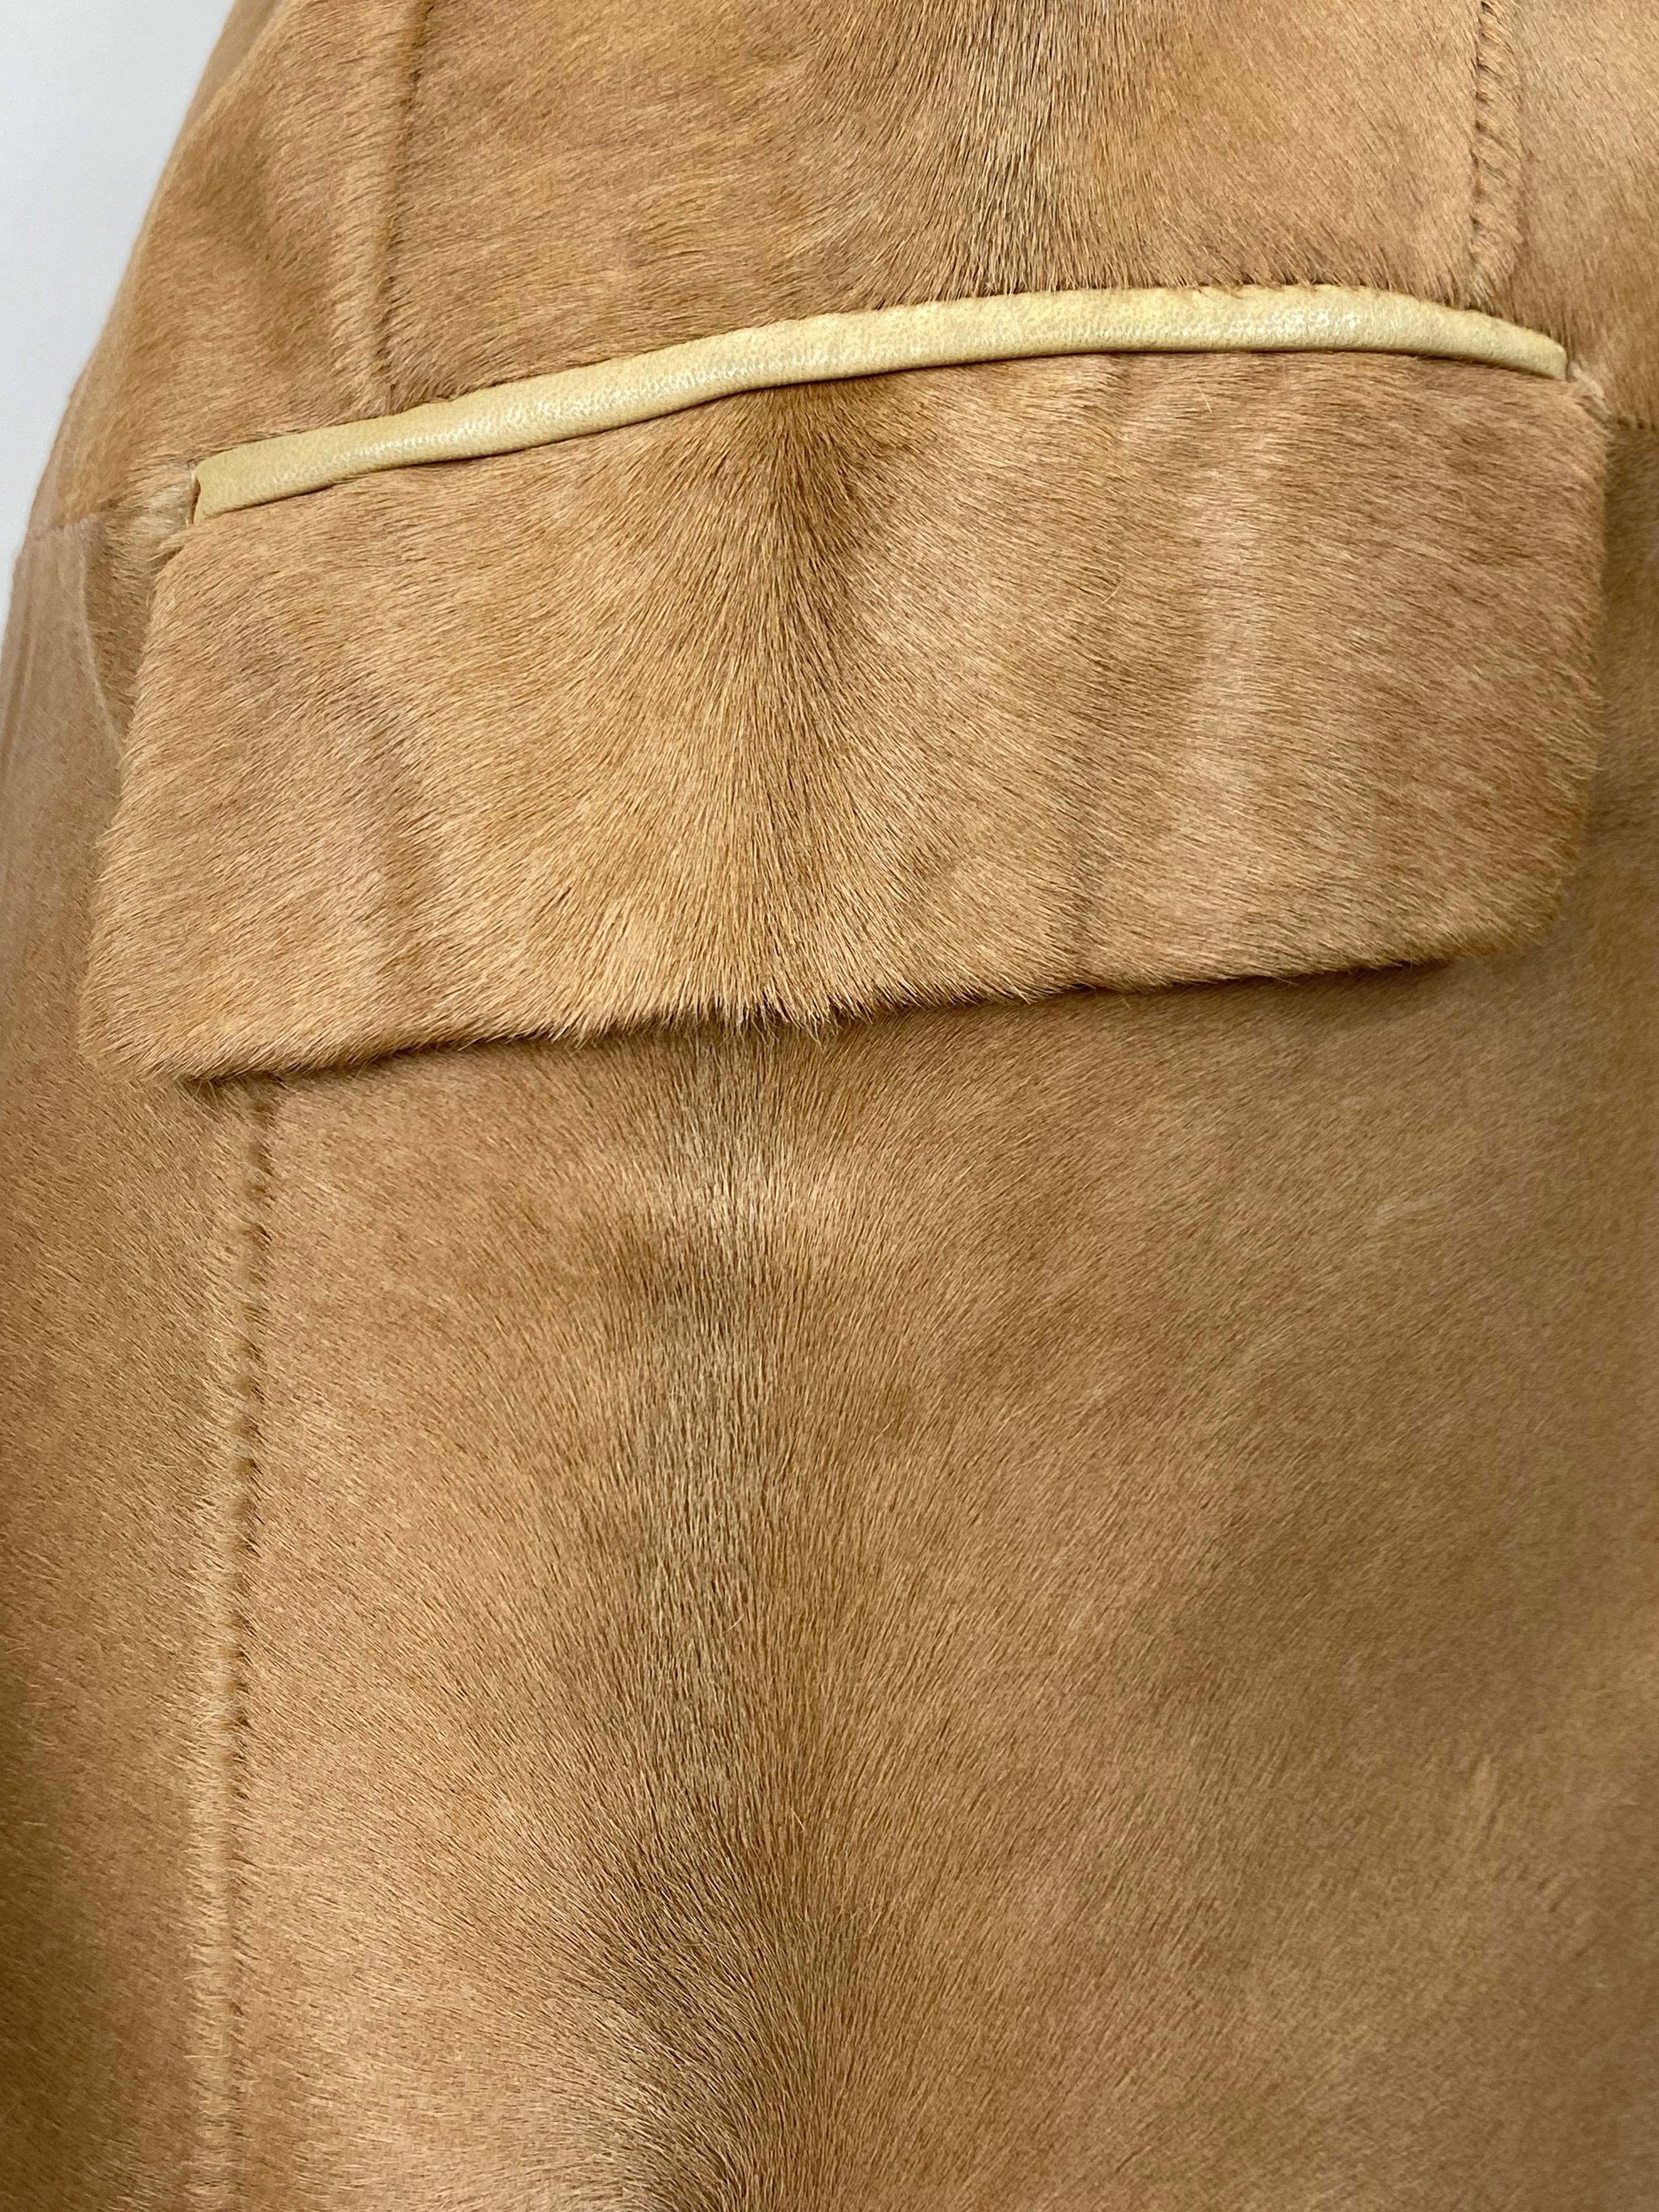 F/W Runway 1996 Vintage Tom Ford for Gucci Fur Leather Coat Museum Worthy size S For Sale 3